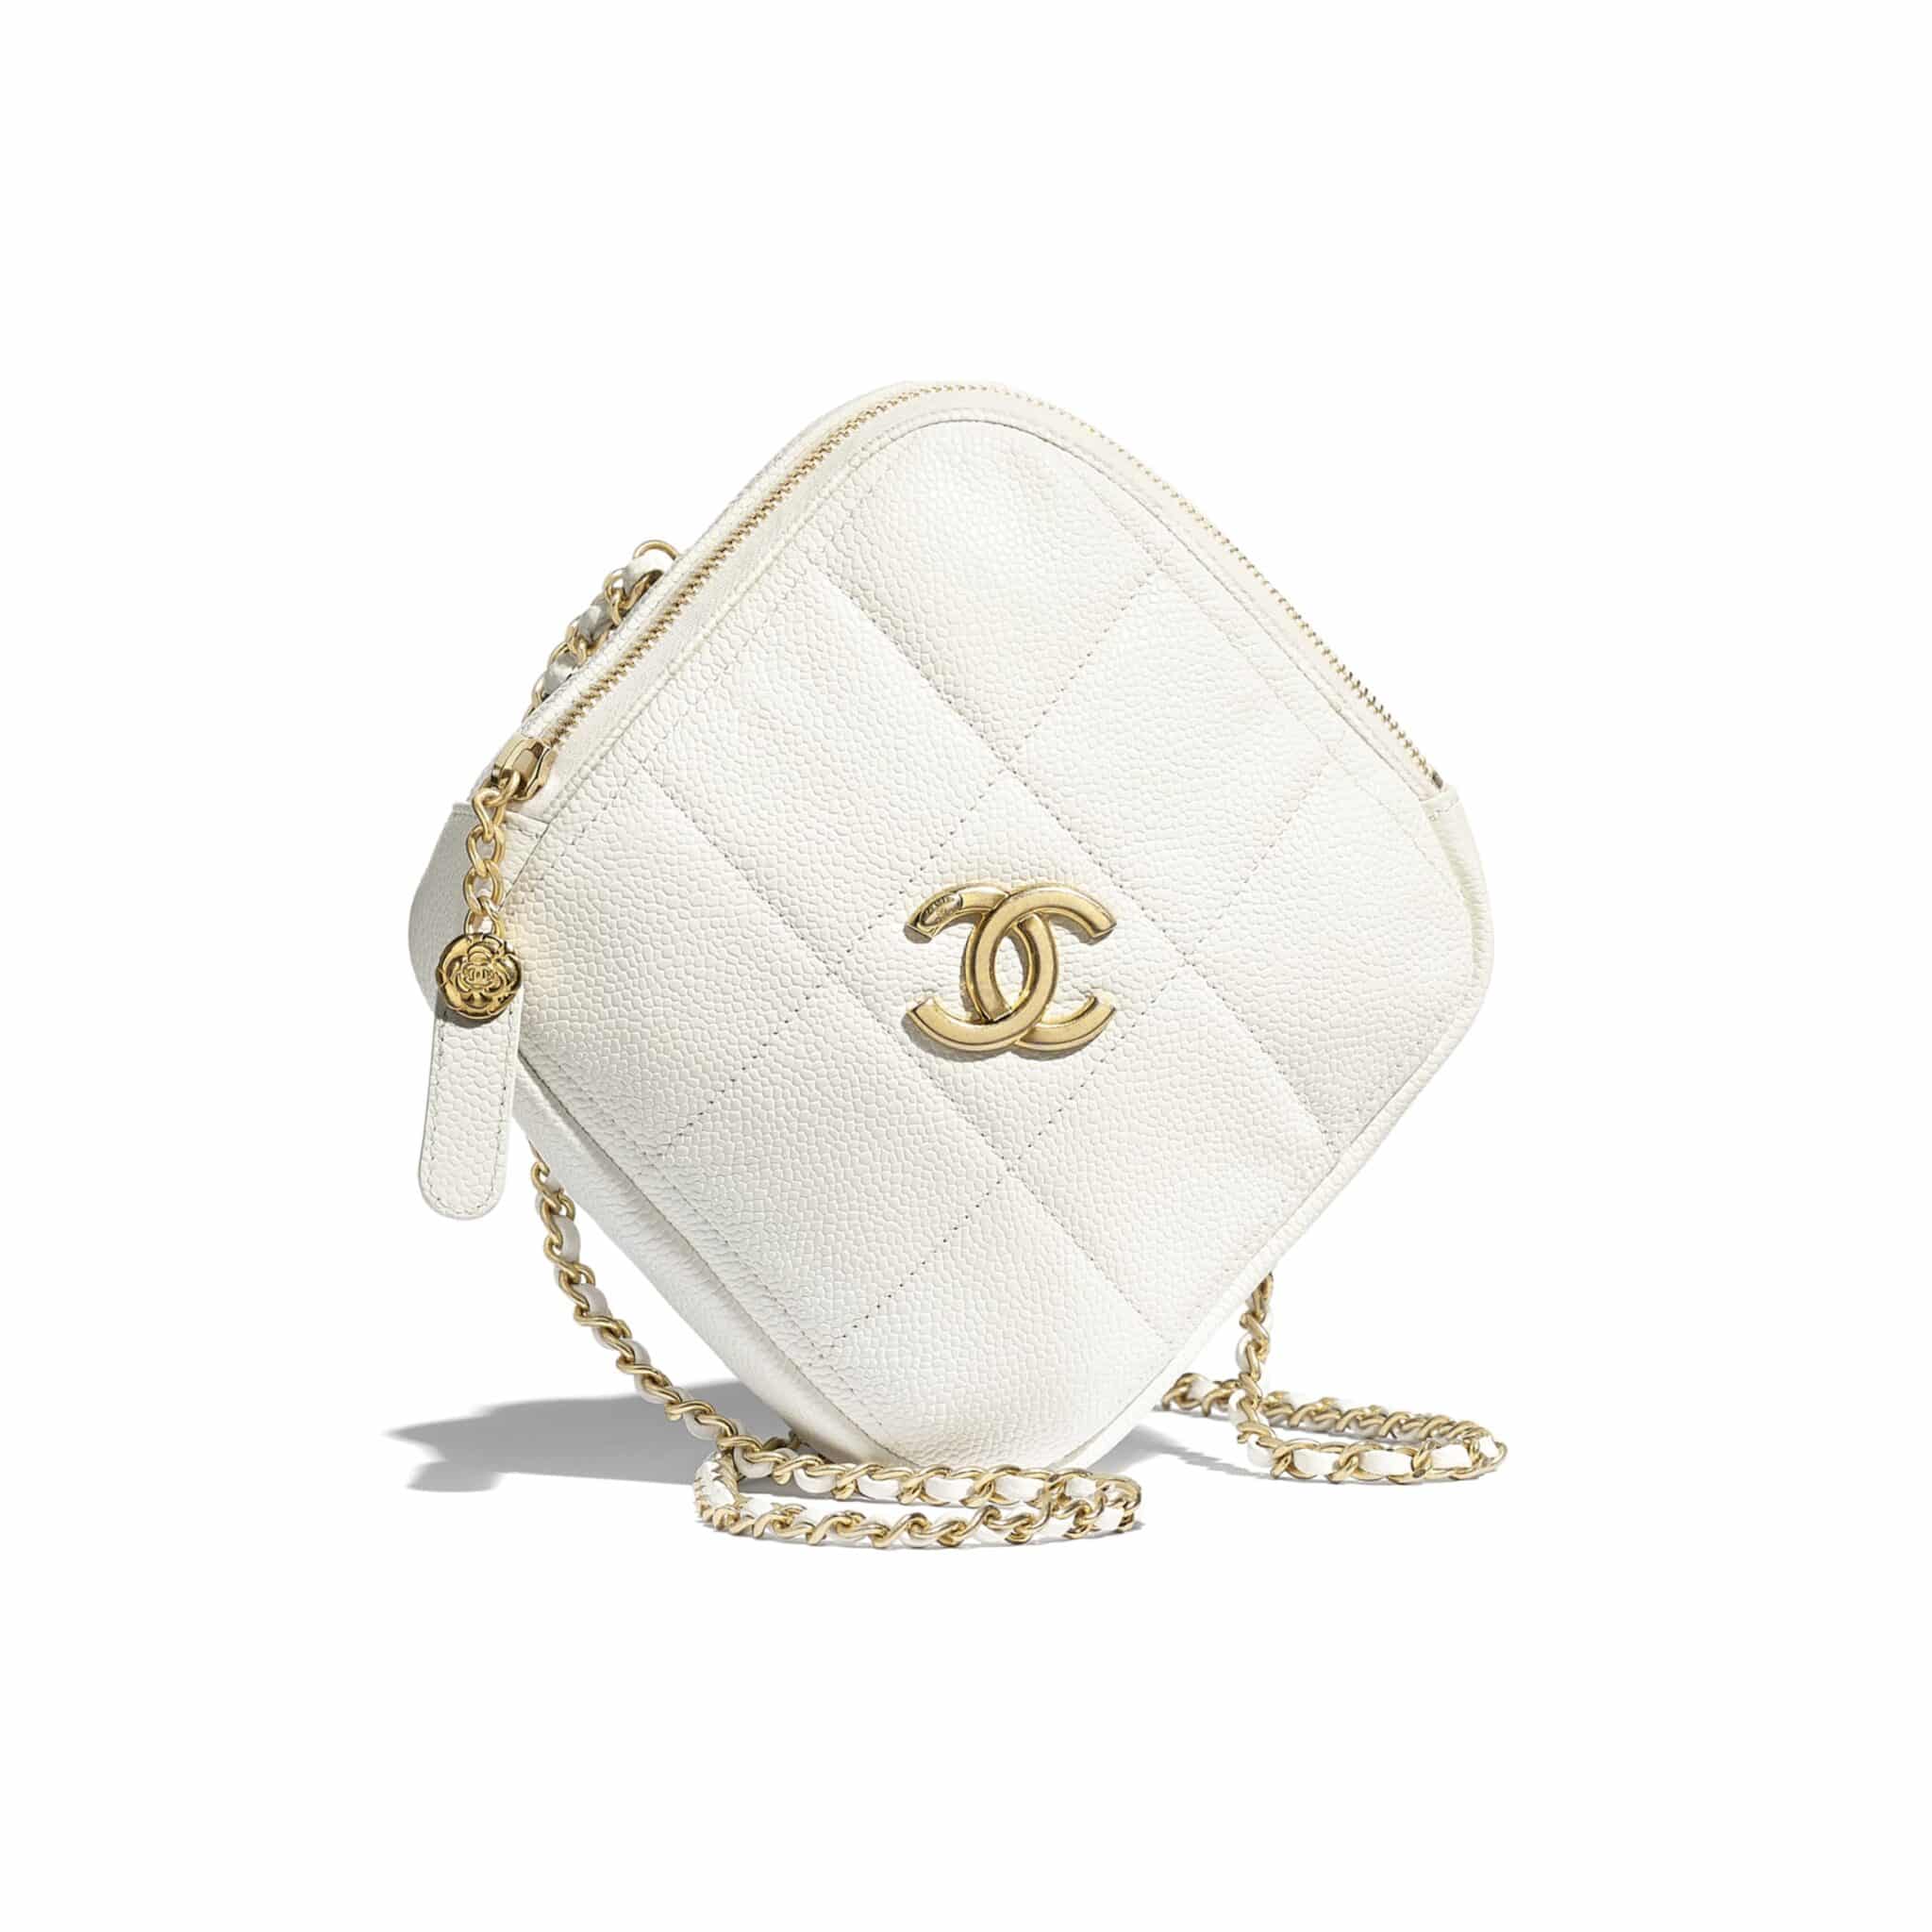 Chanel Fall/Winter 2020 Bag Collection Featuring Diamonds and Pearls -  Spotted Fashion